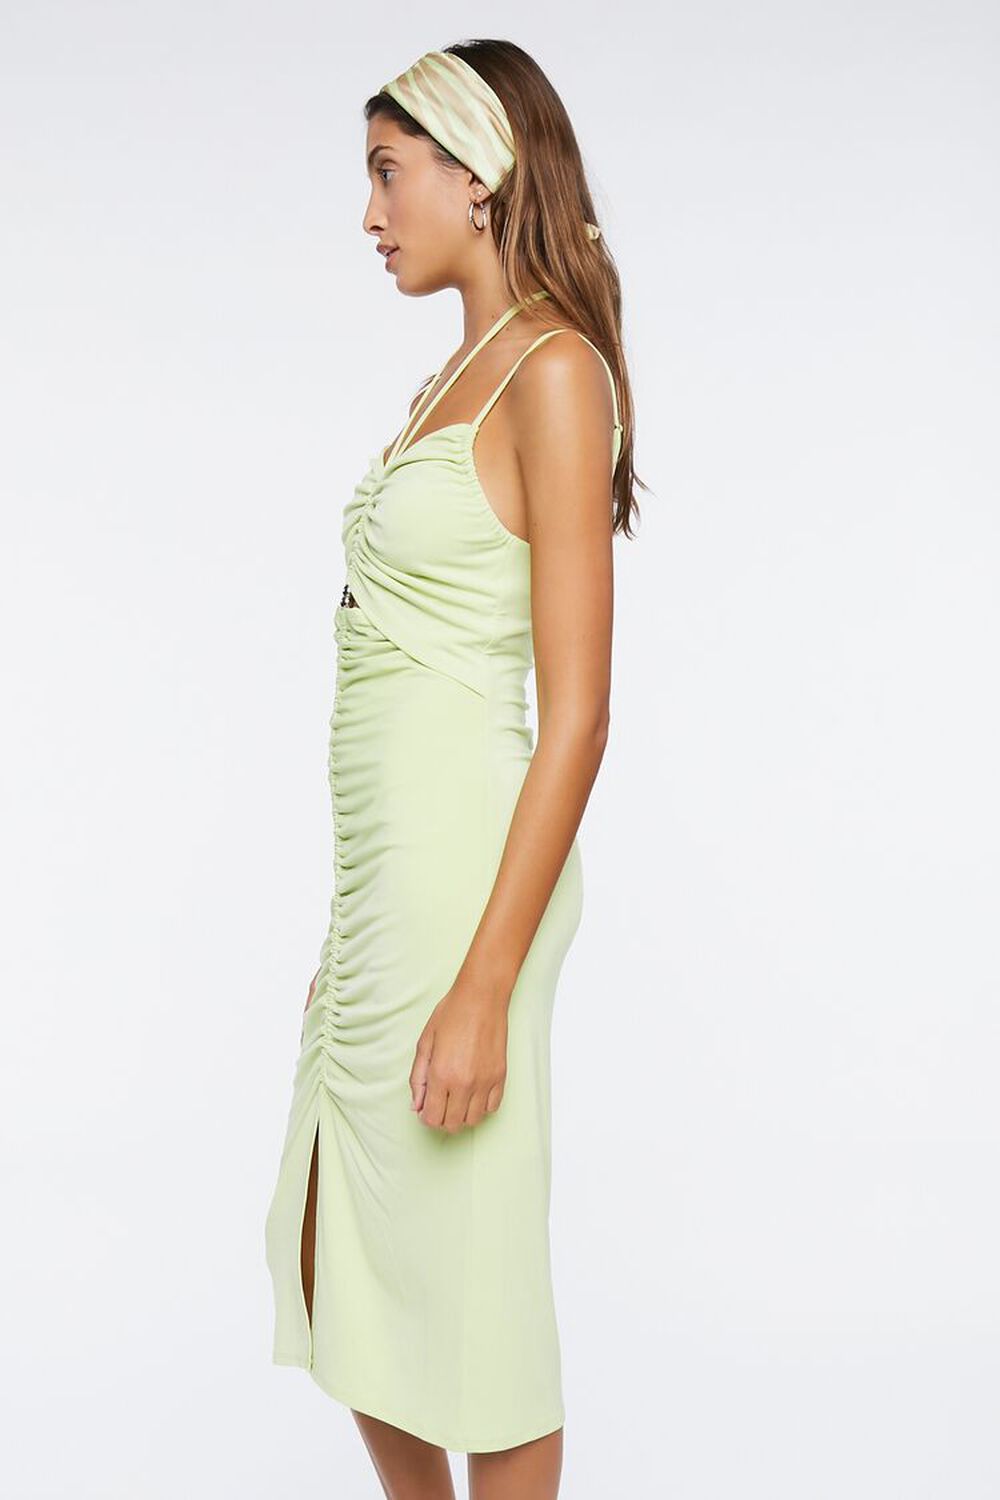 WILD LIME Ruched Cutout Halter Midi Dress, image 2